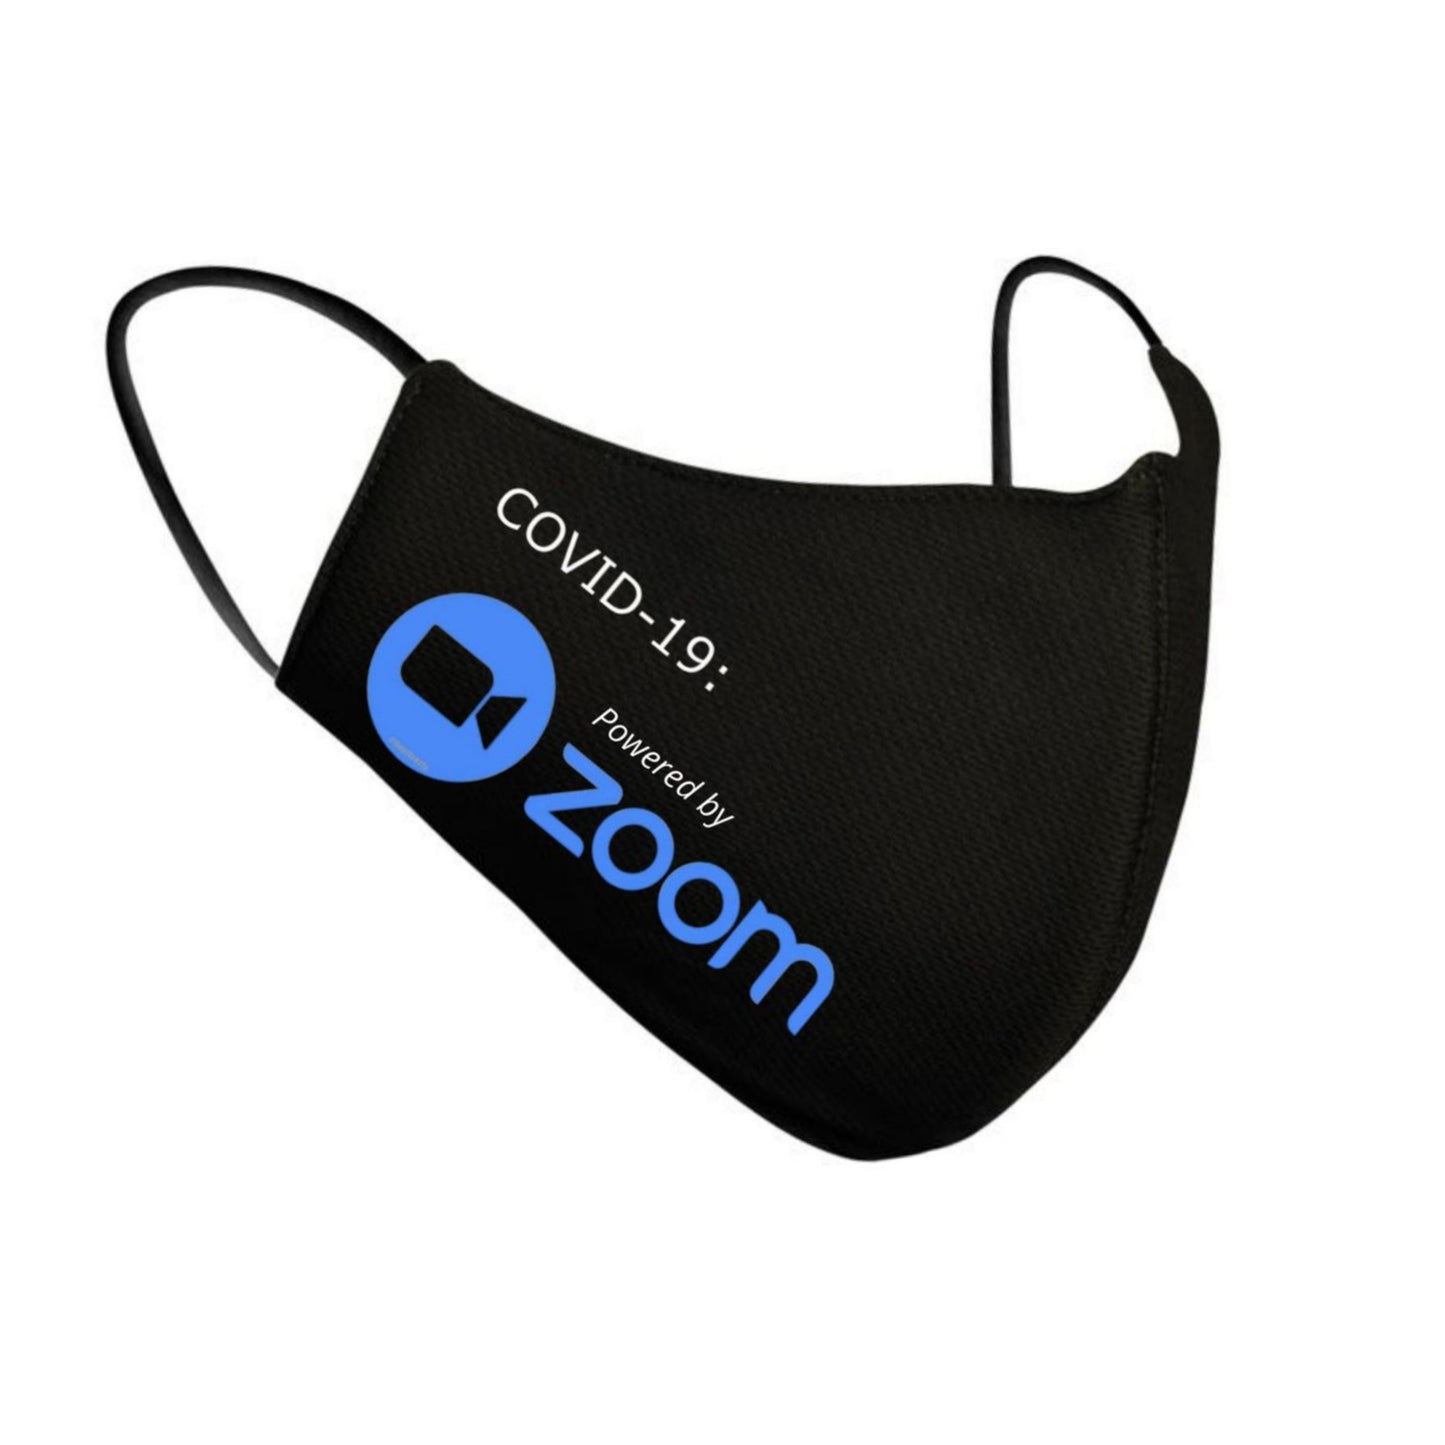 "Powered by Zoom" Reusable Face Mask